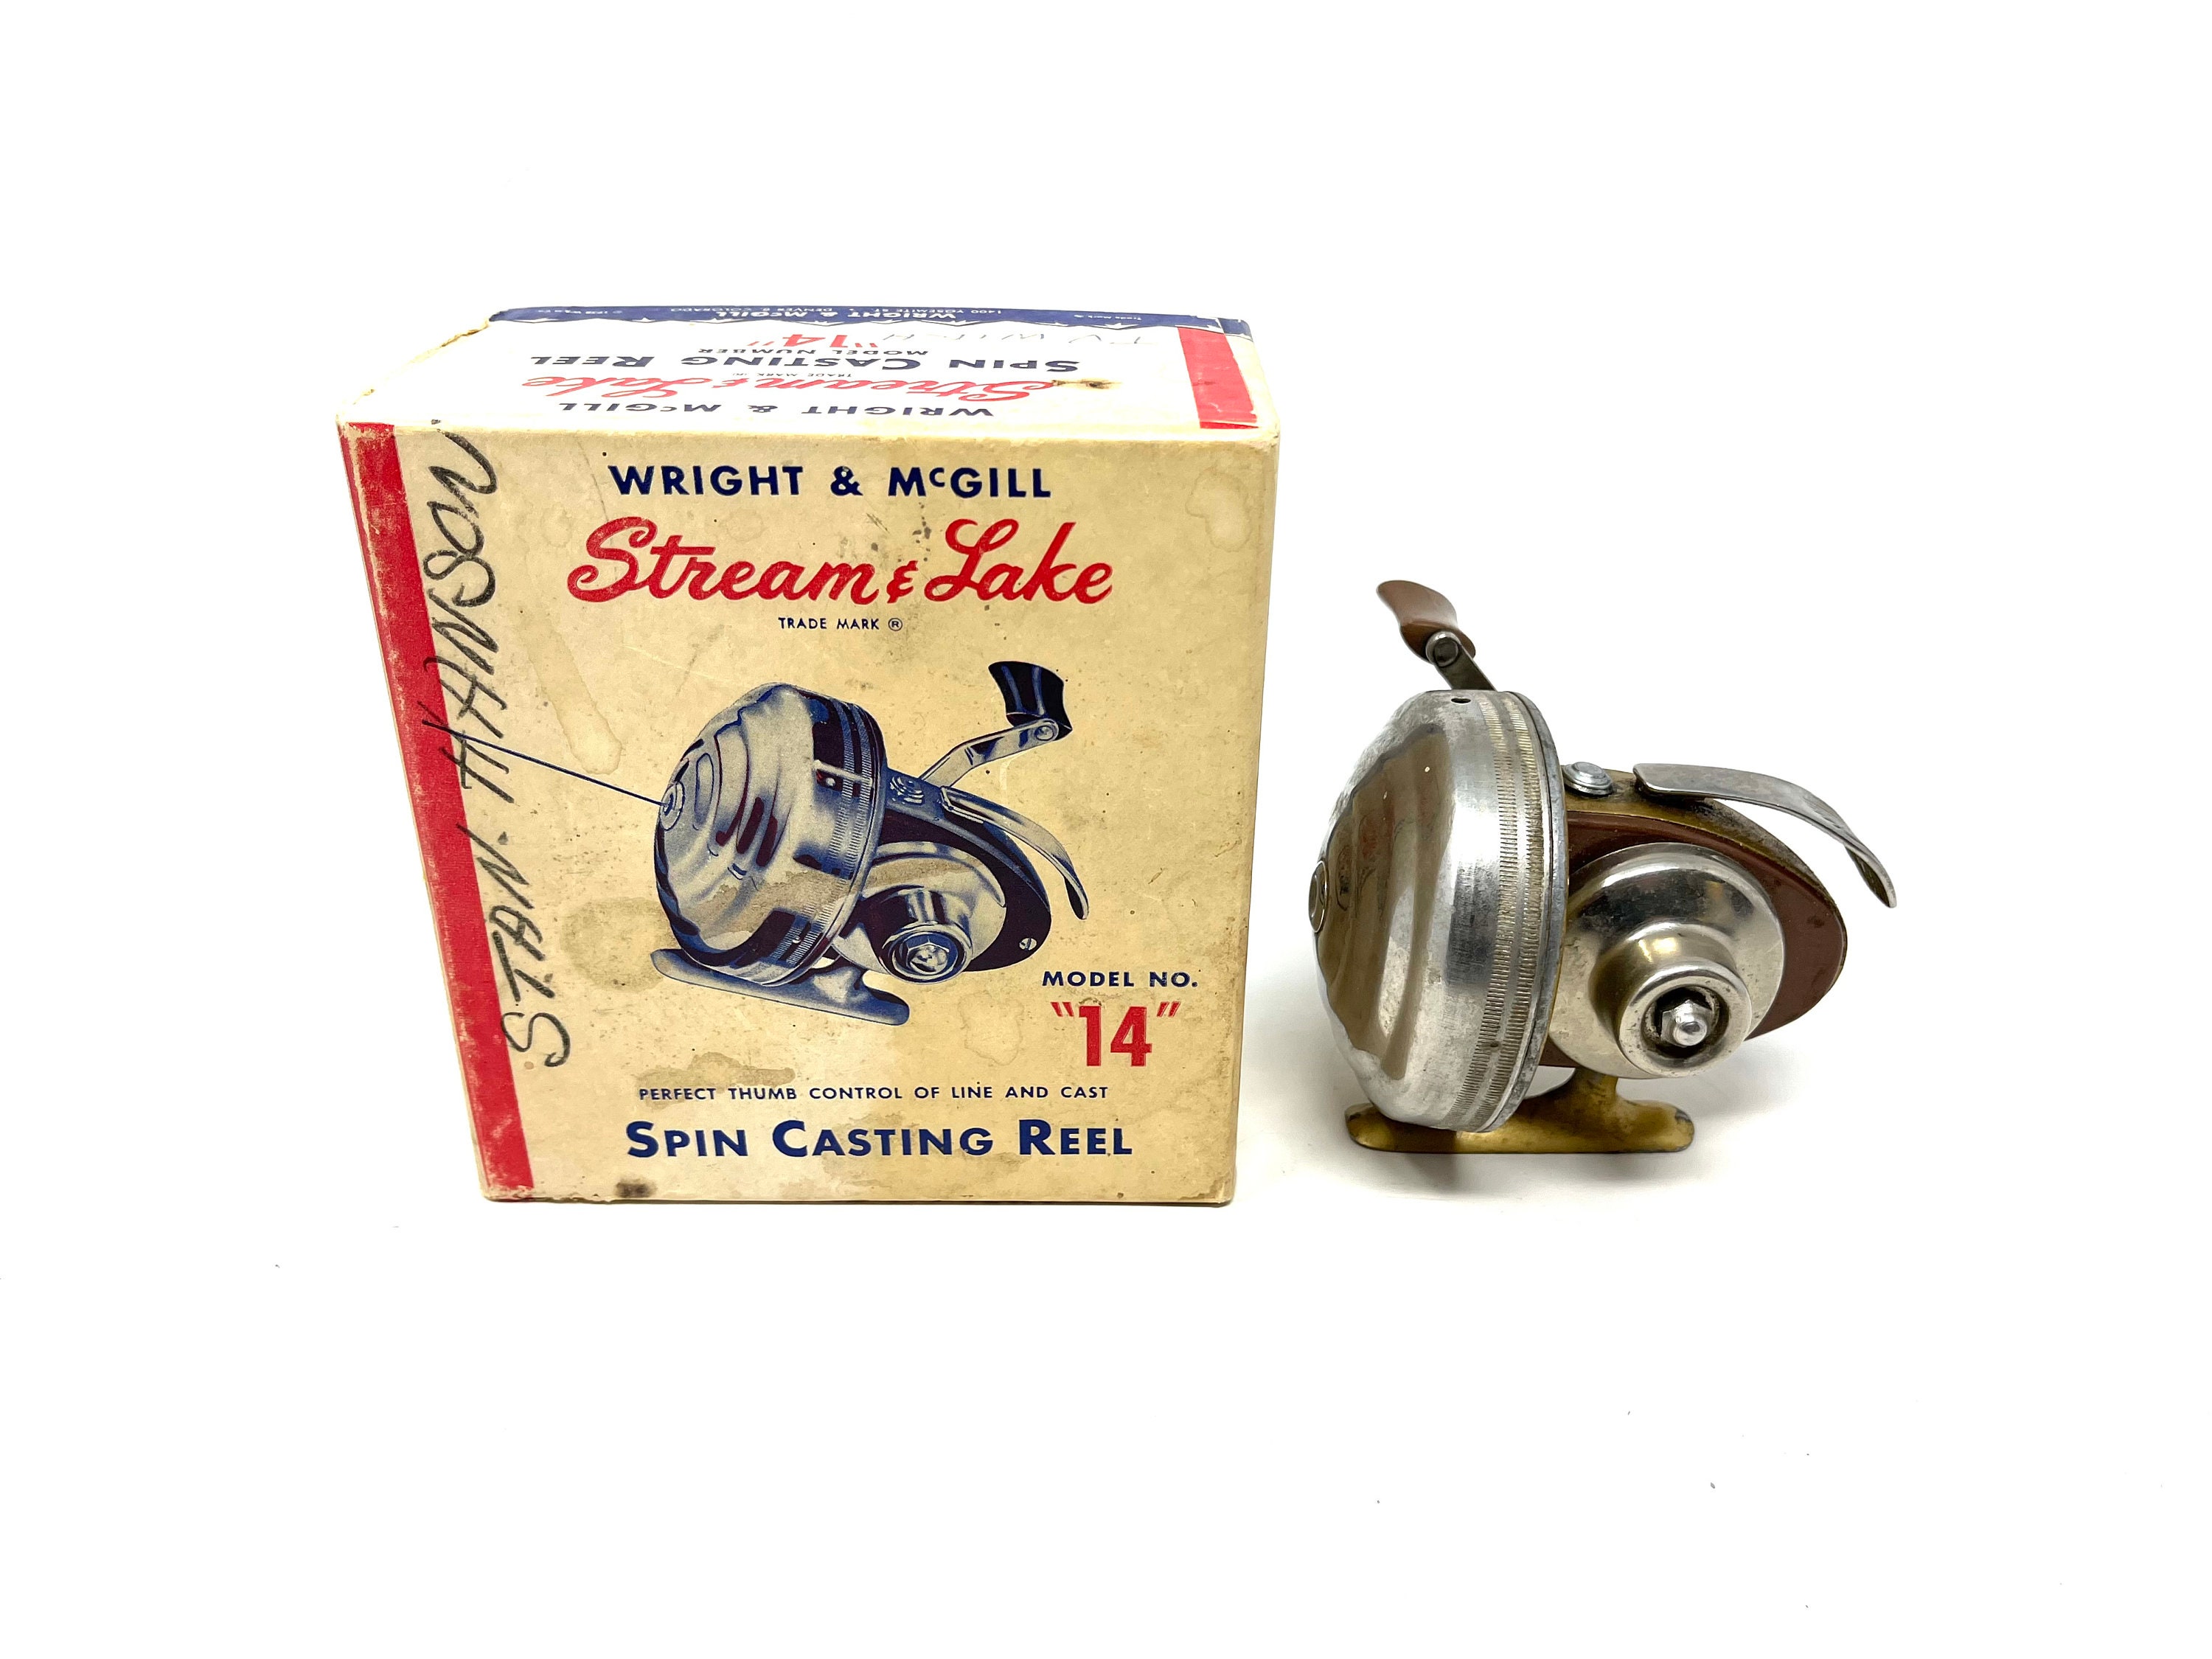 Vintage Wright and Mcgill Stream and Lake Model 14 Spin Casting